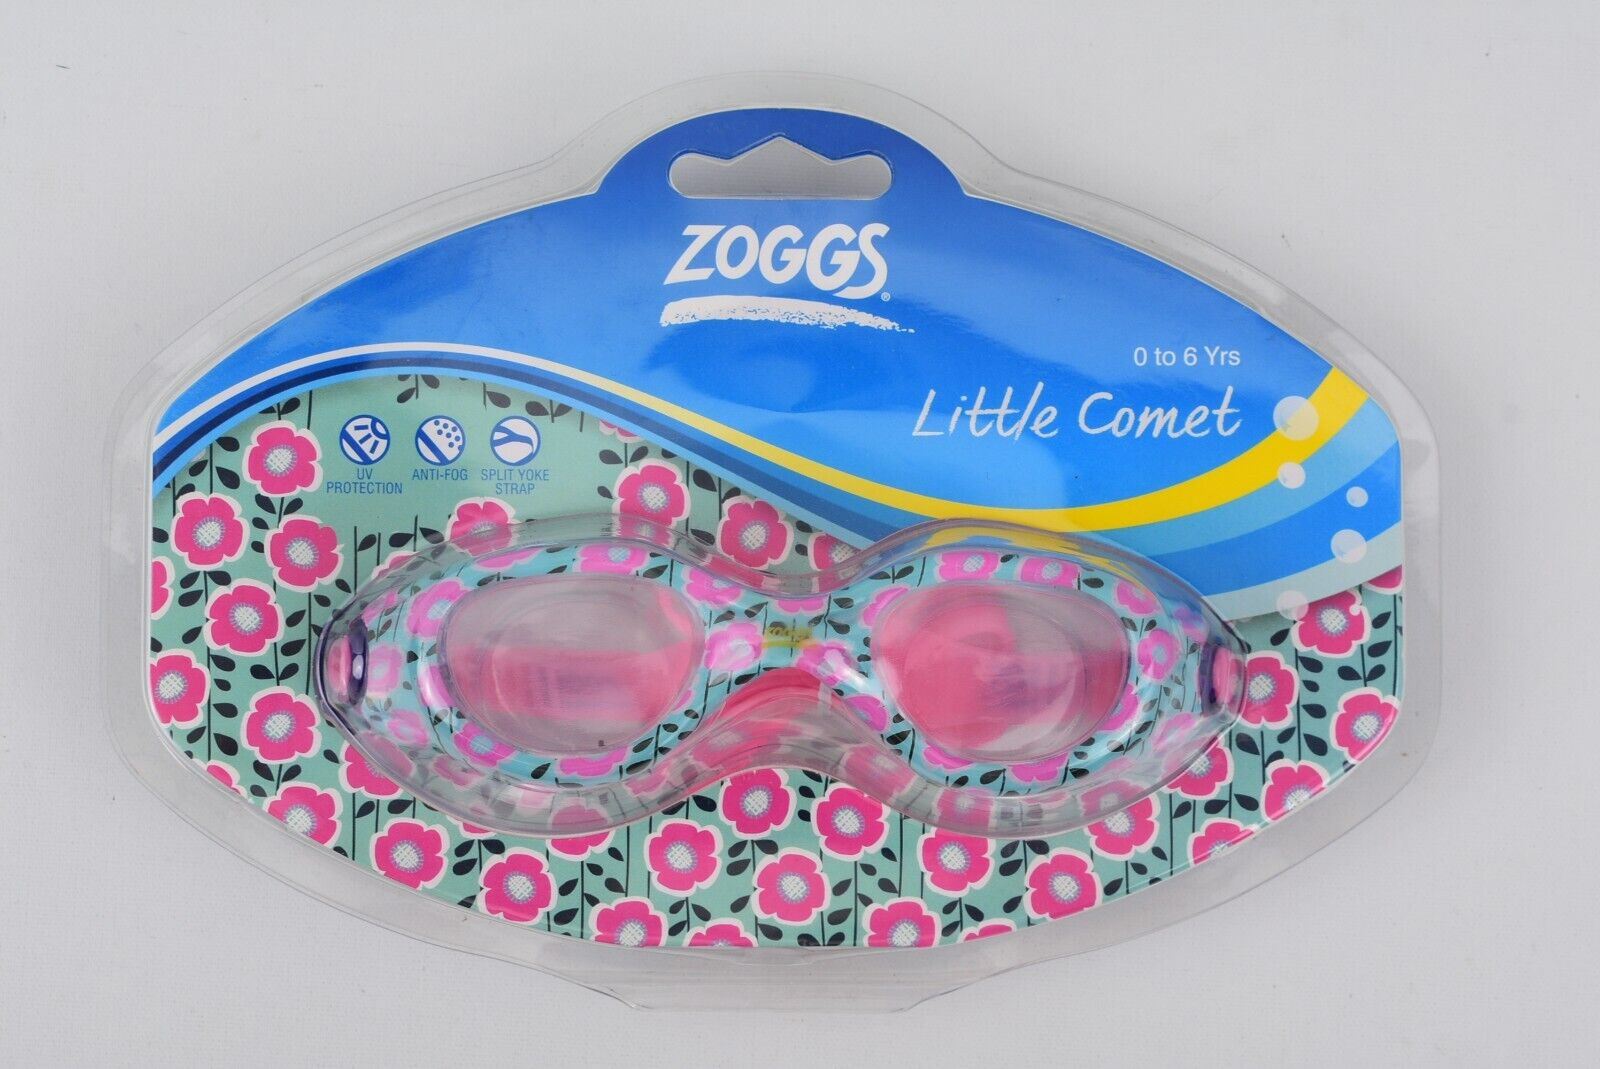 ZOGGS 308886 Little Comet Toddlers Kids Swimming Goggles, 0-6 years